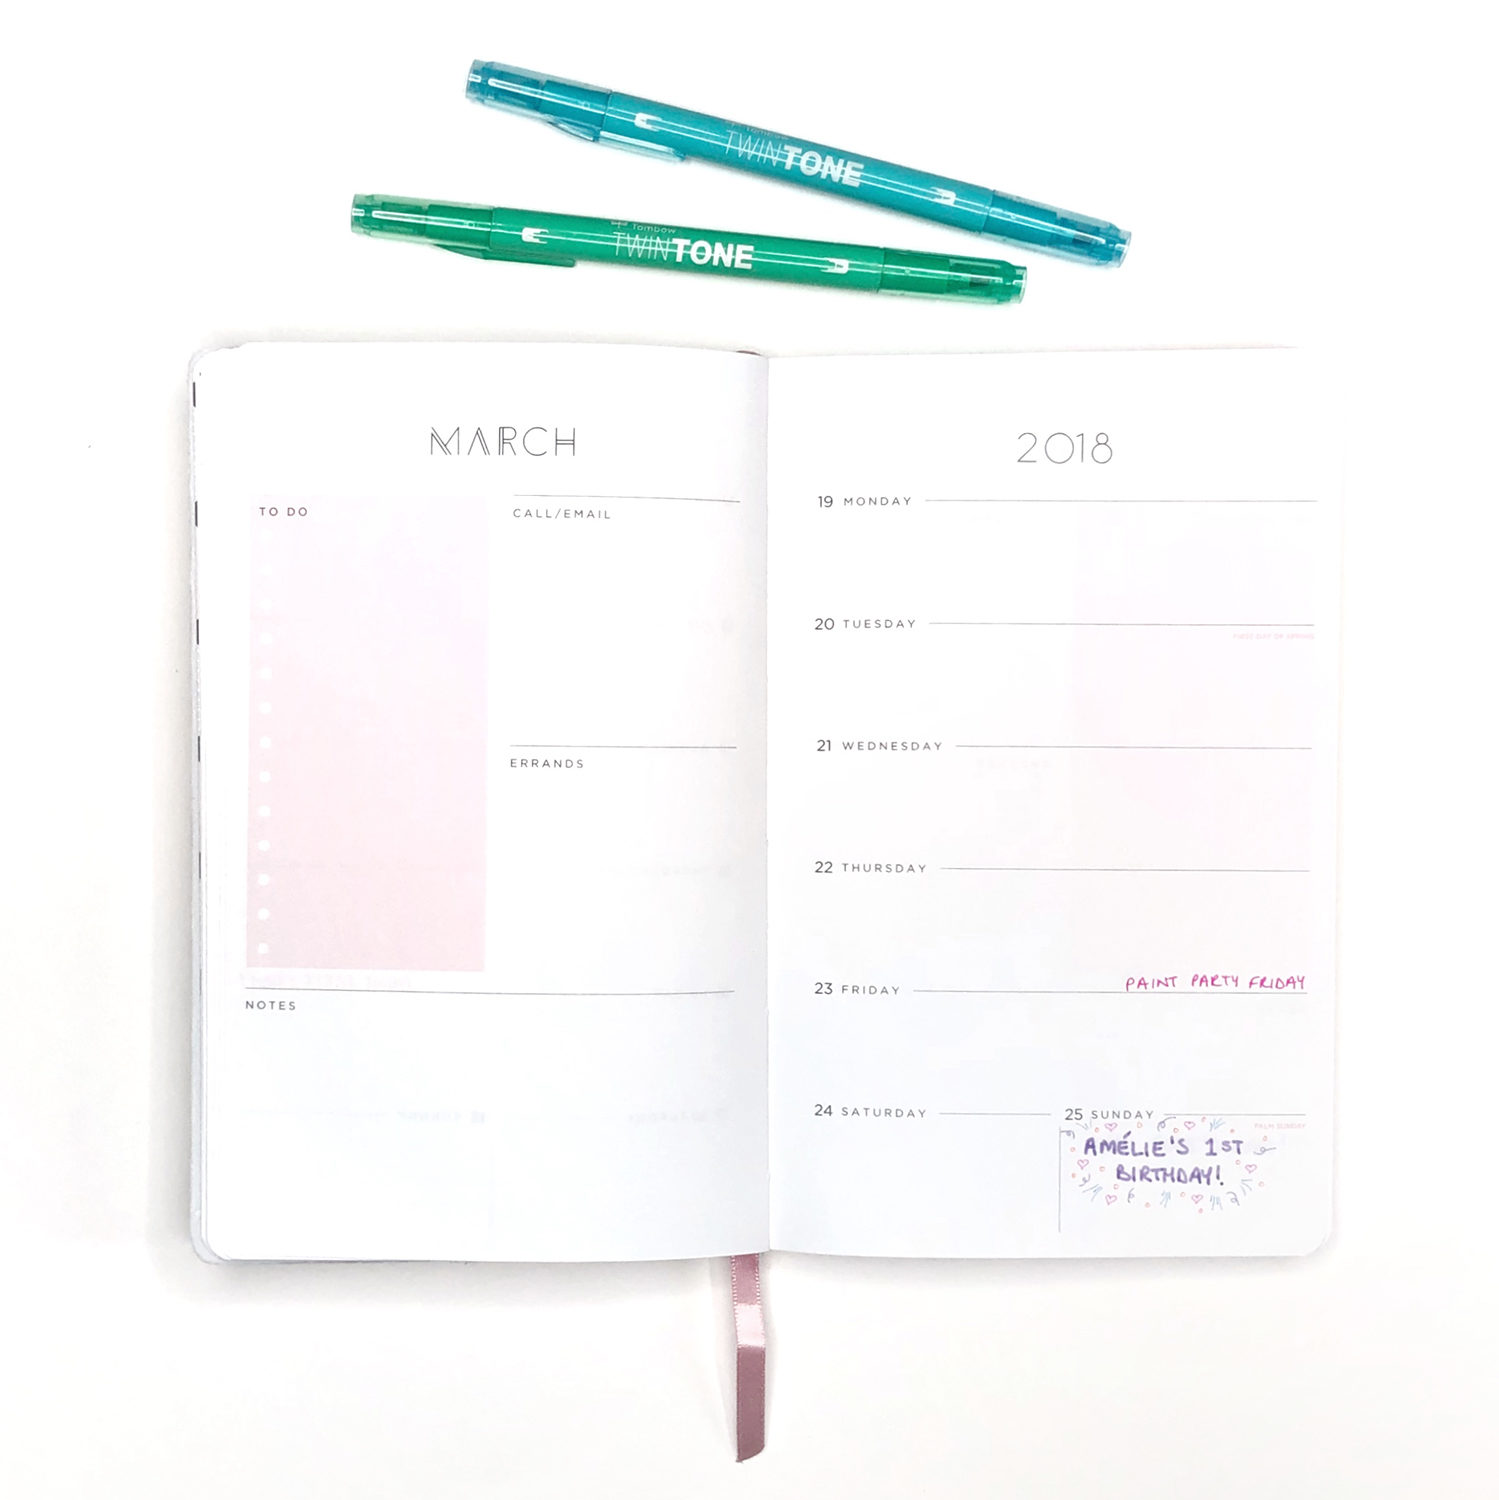 How to add pretty patterns to your planner with Tombow